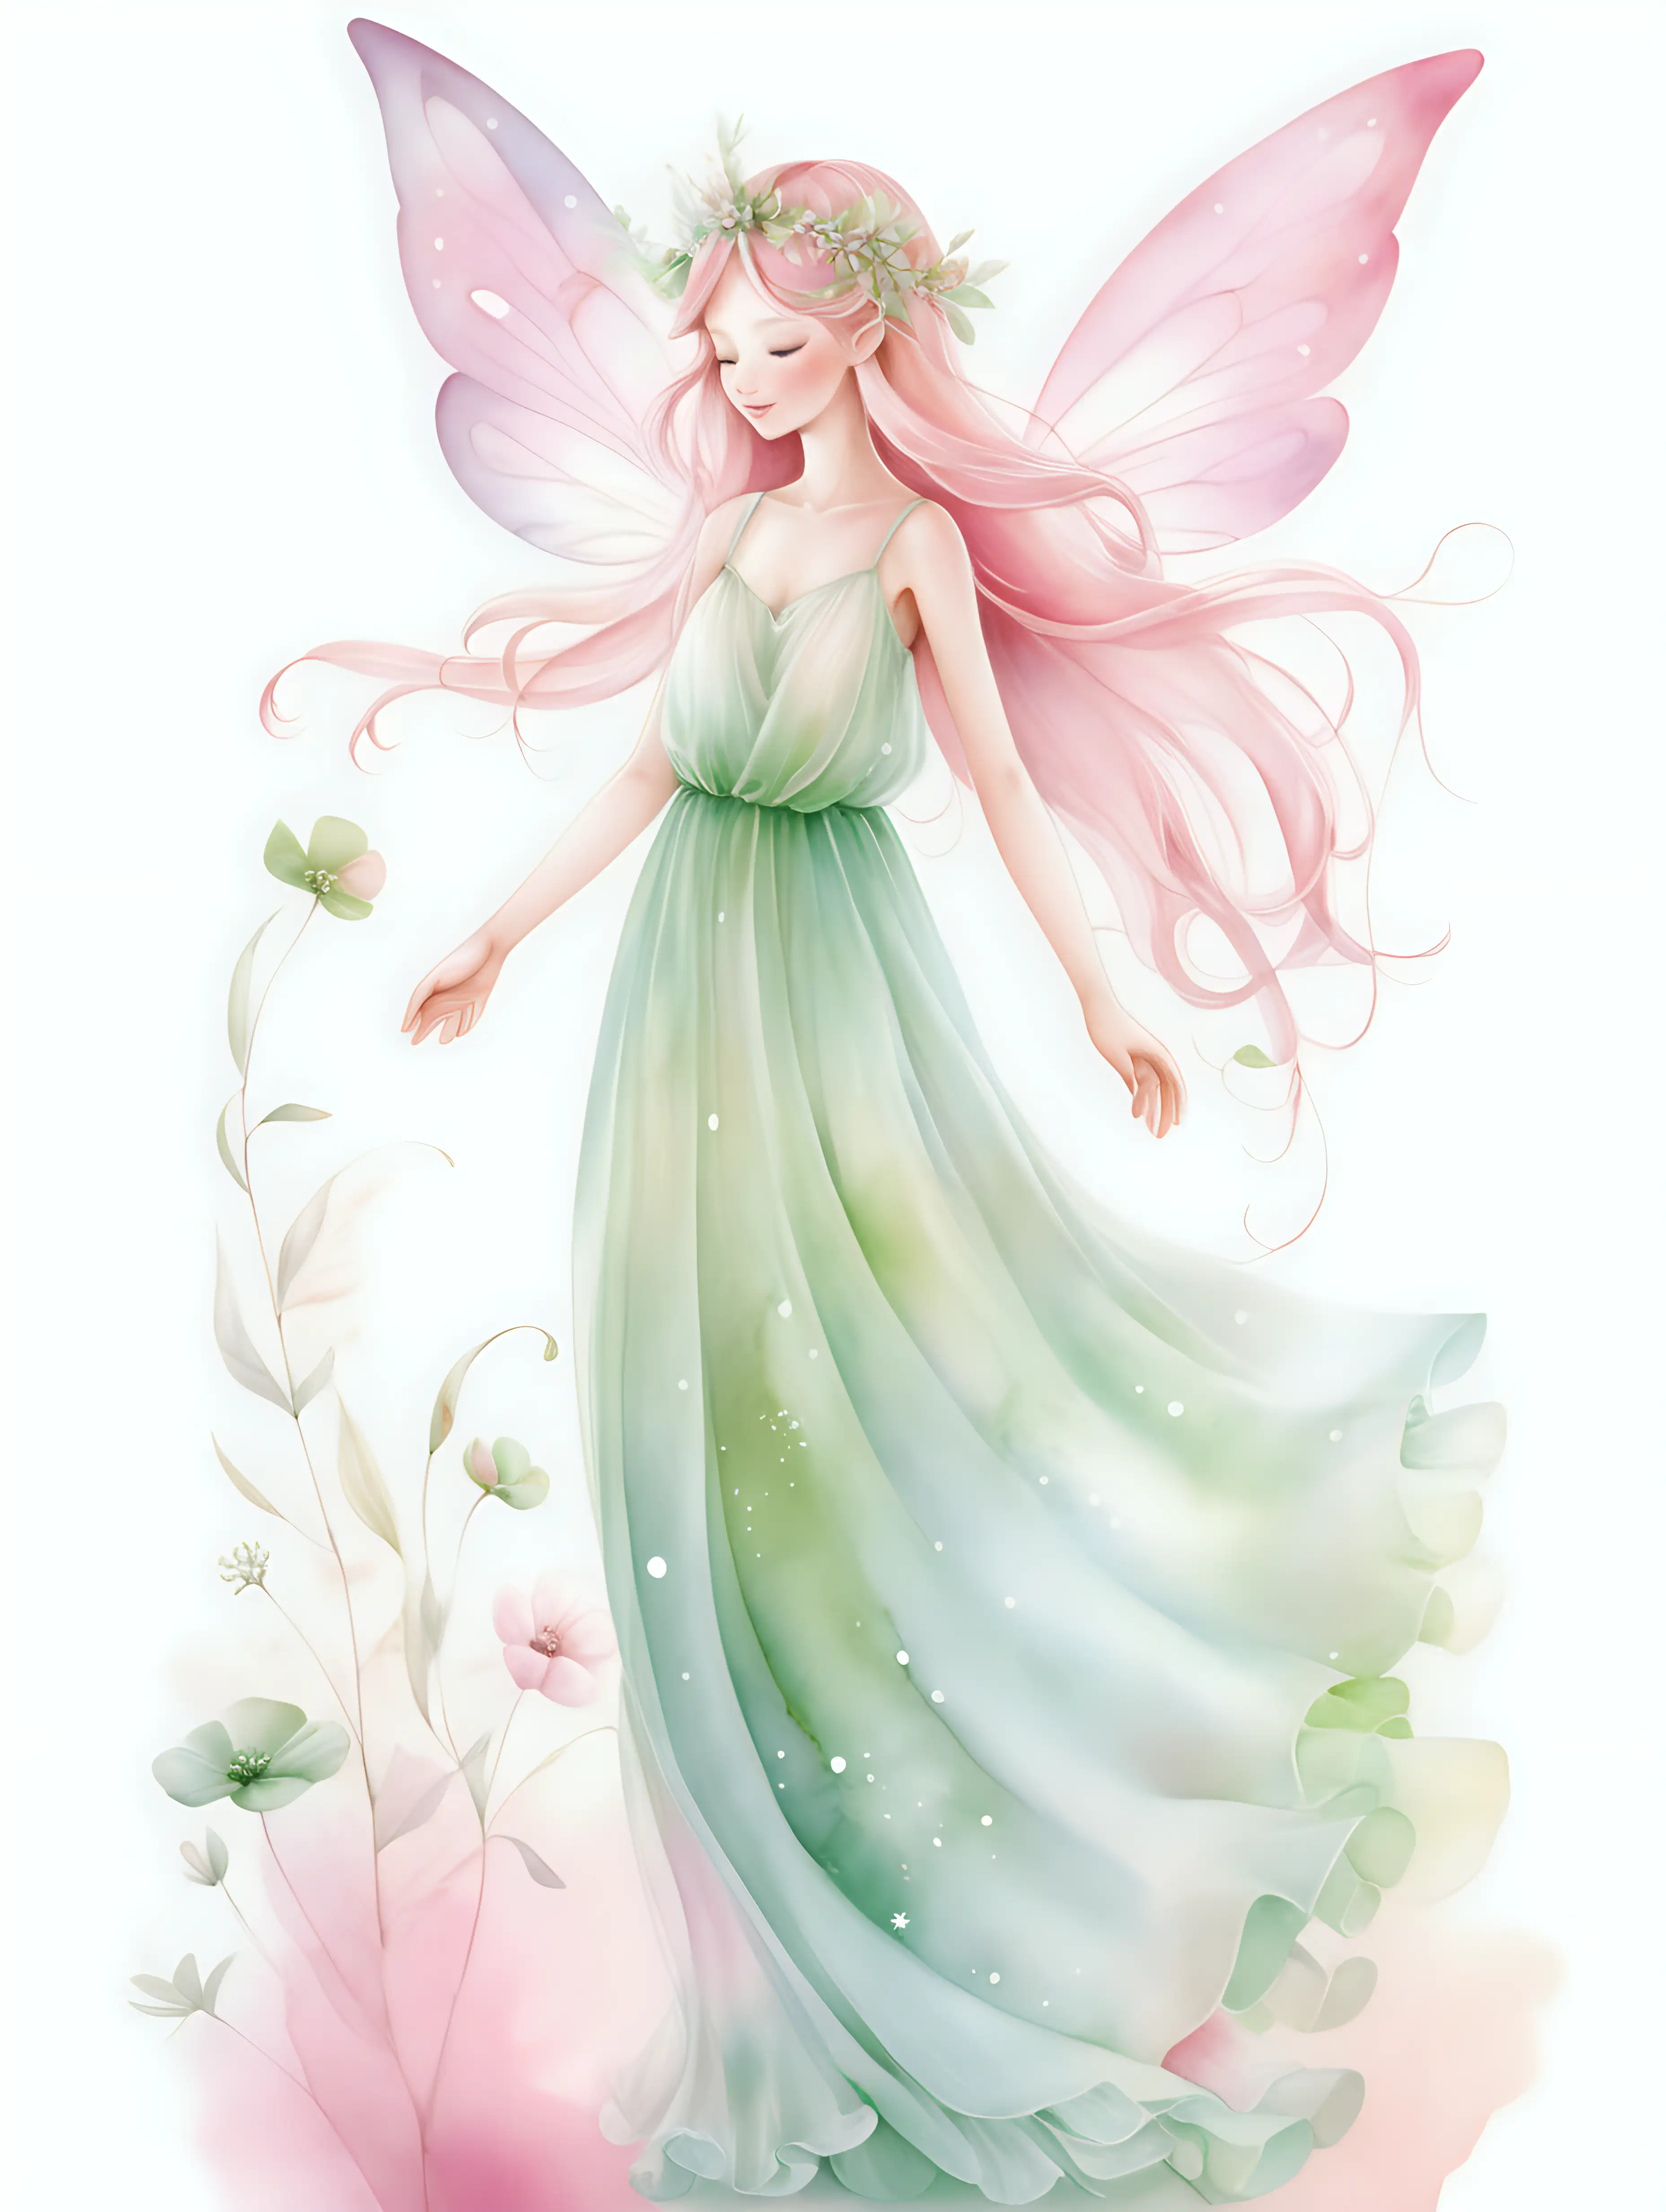 Cheerful Fairy in Dreamy Watercolor Style with Pastel Shades